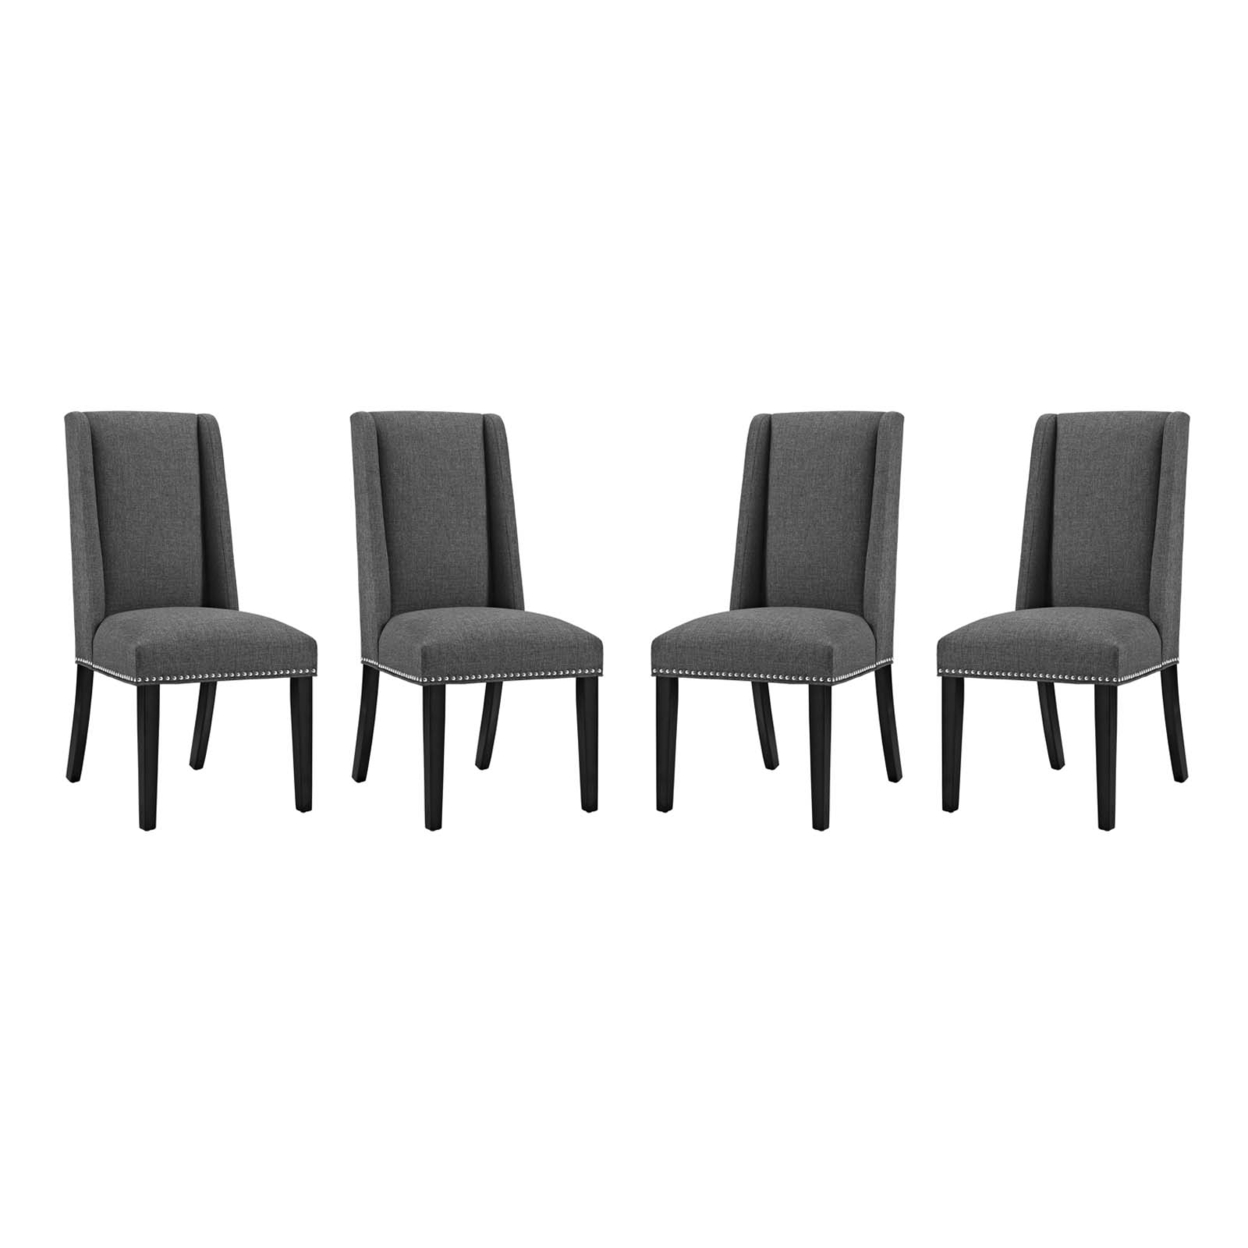 Baron Dining Chair Fabric Set of 4, Gray